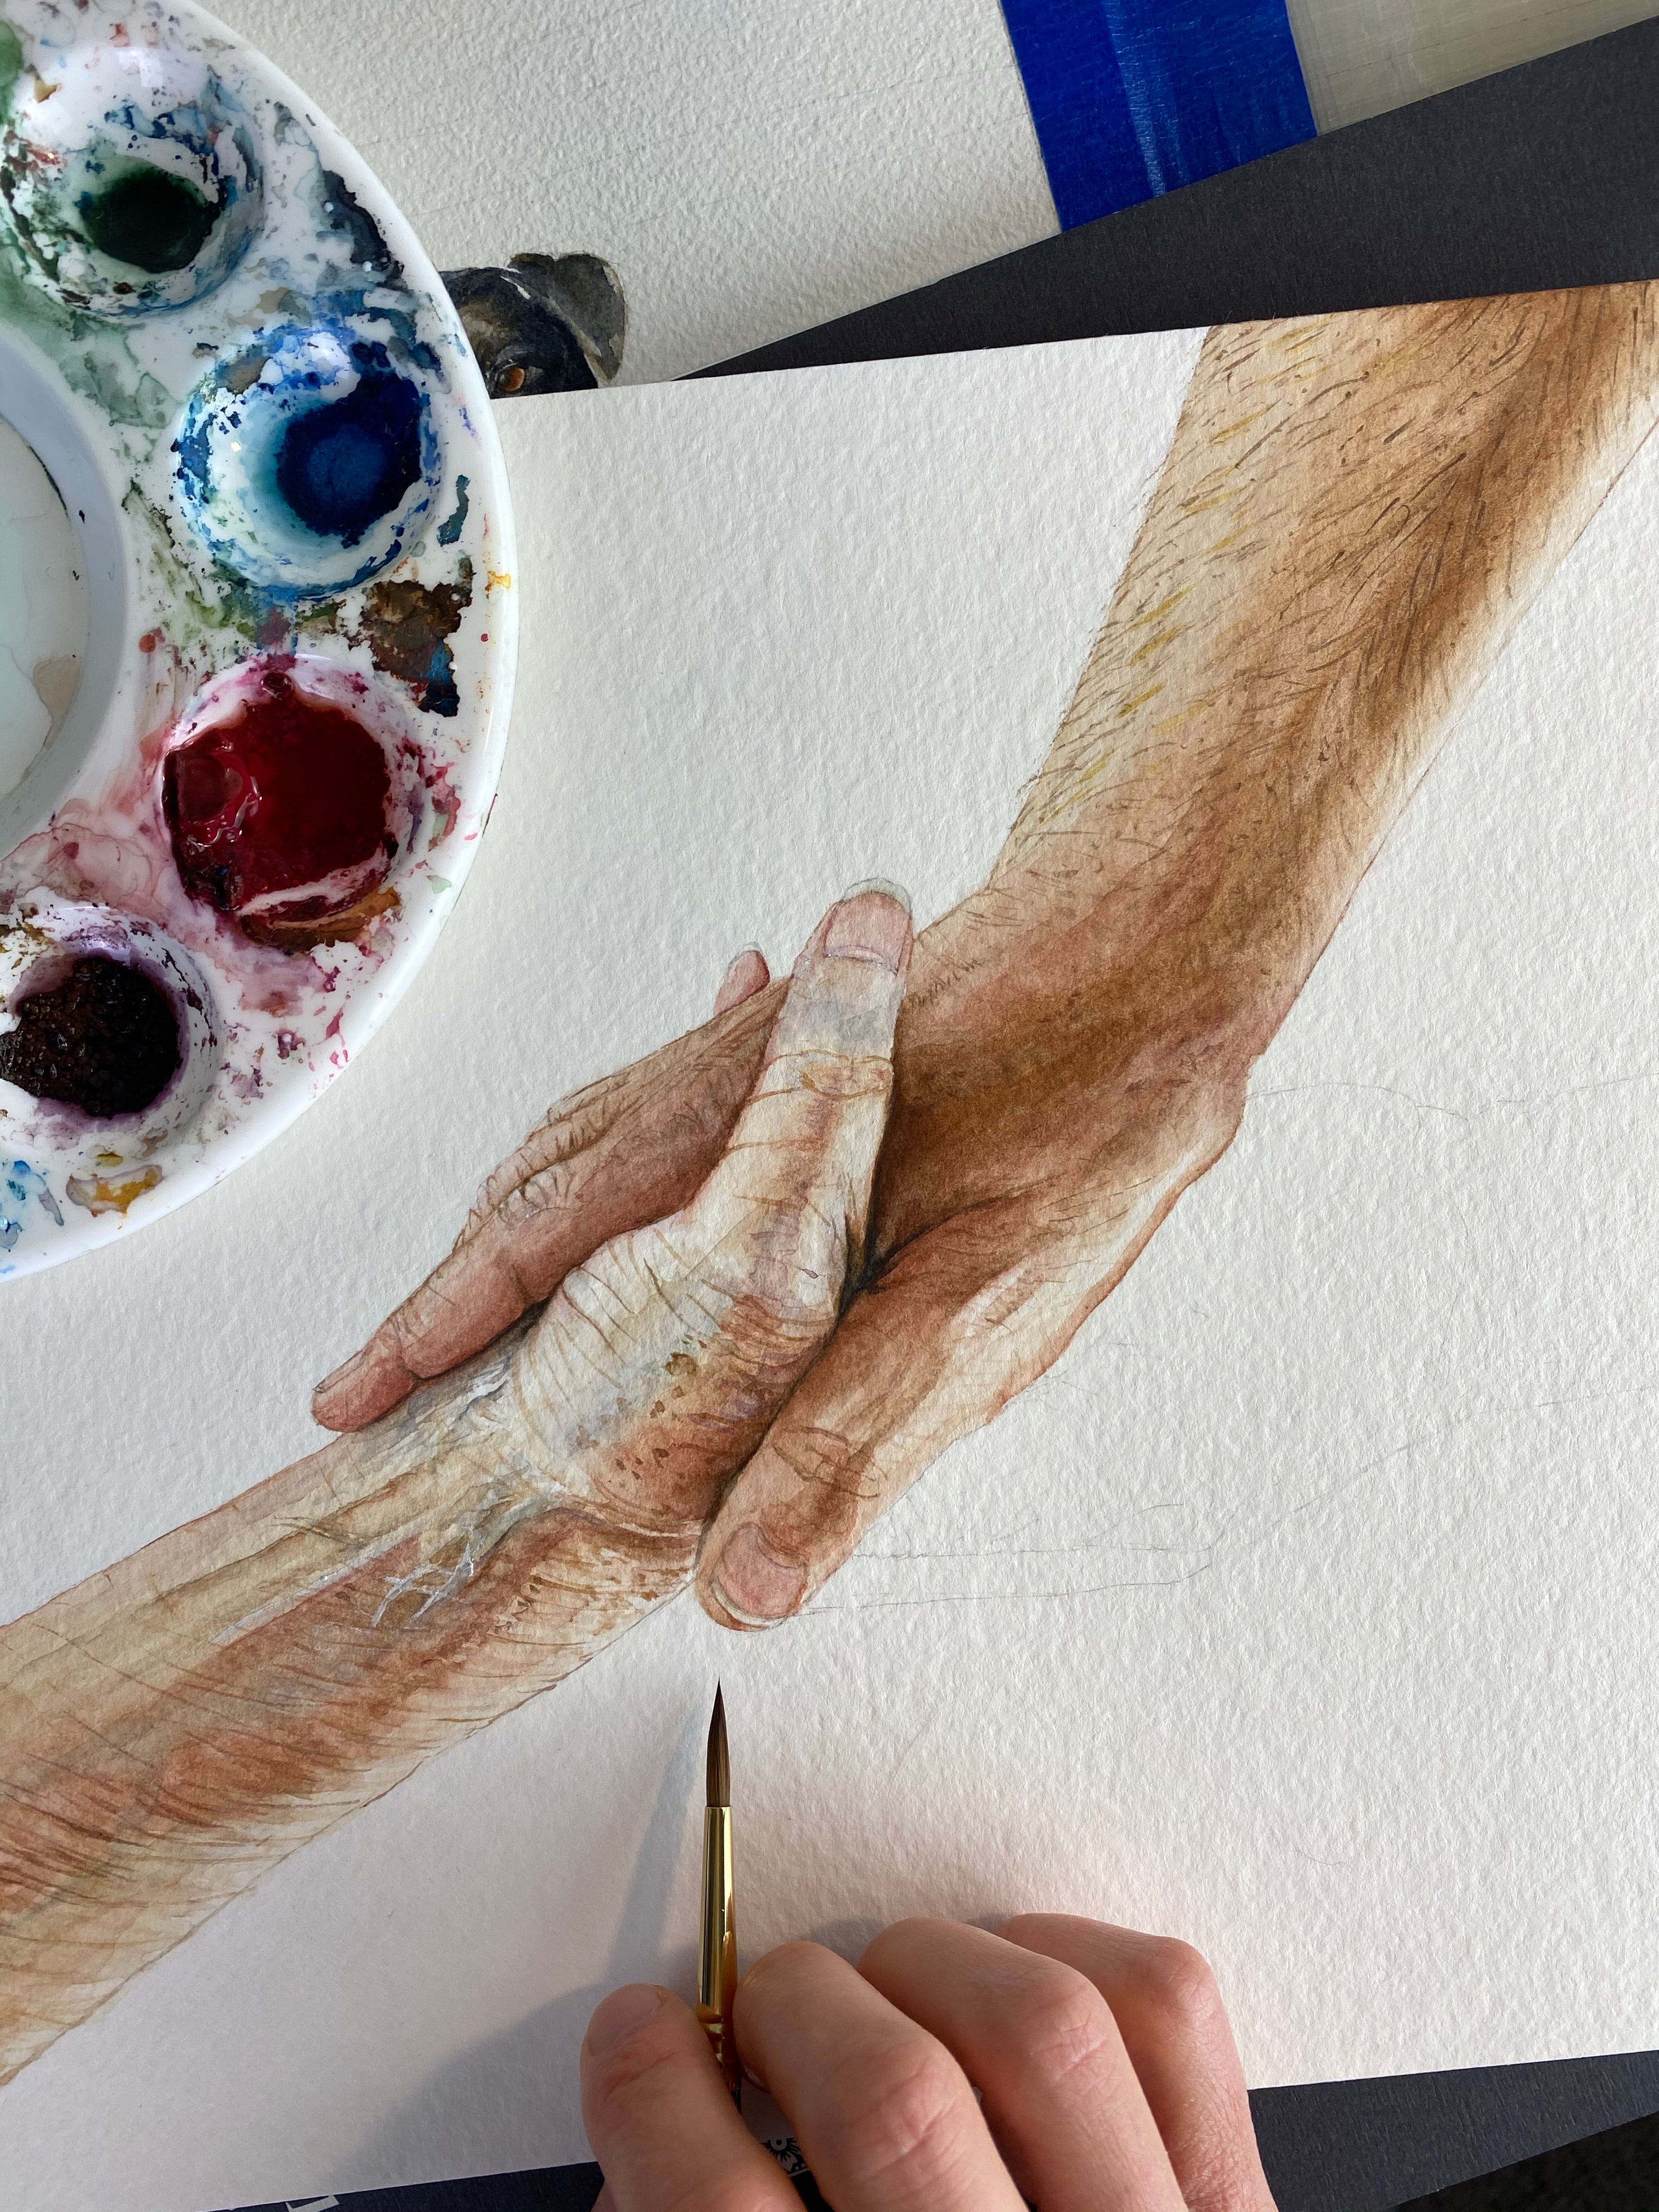 In process painting of helping hands.